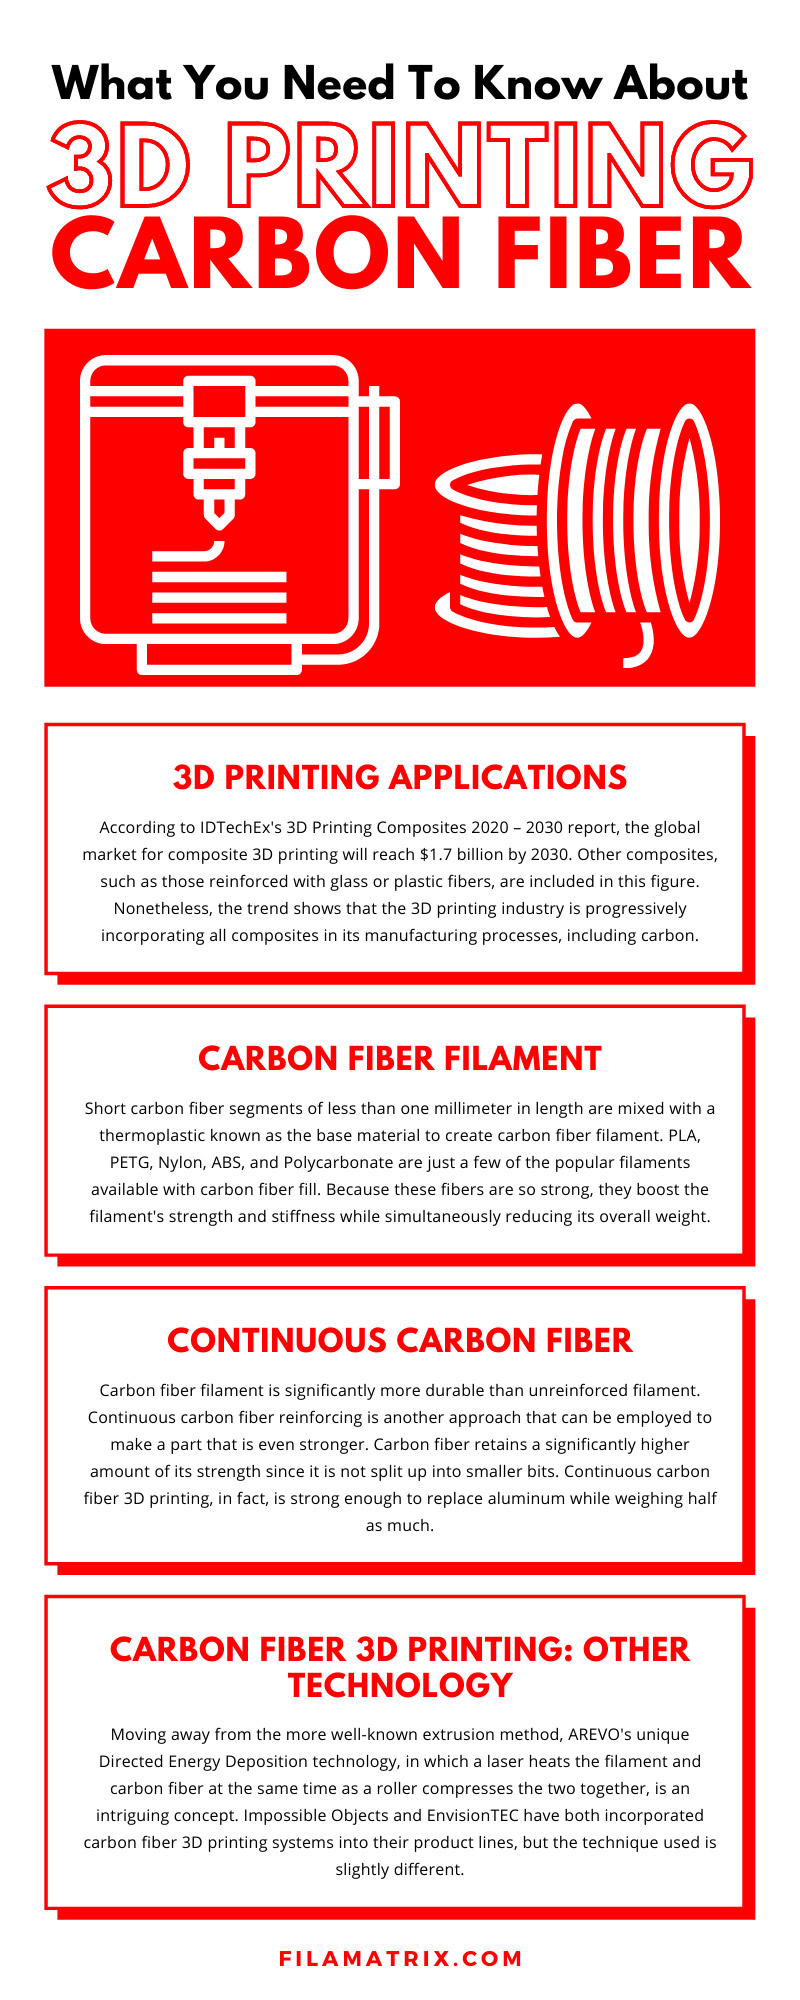 What You Need To Know About 3D Printing Carbon Fiber